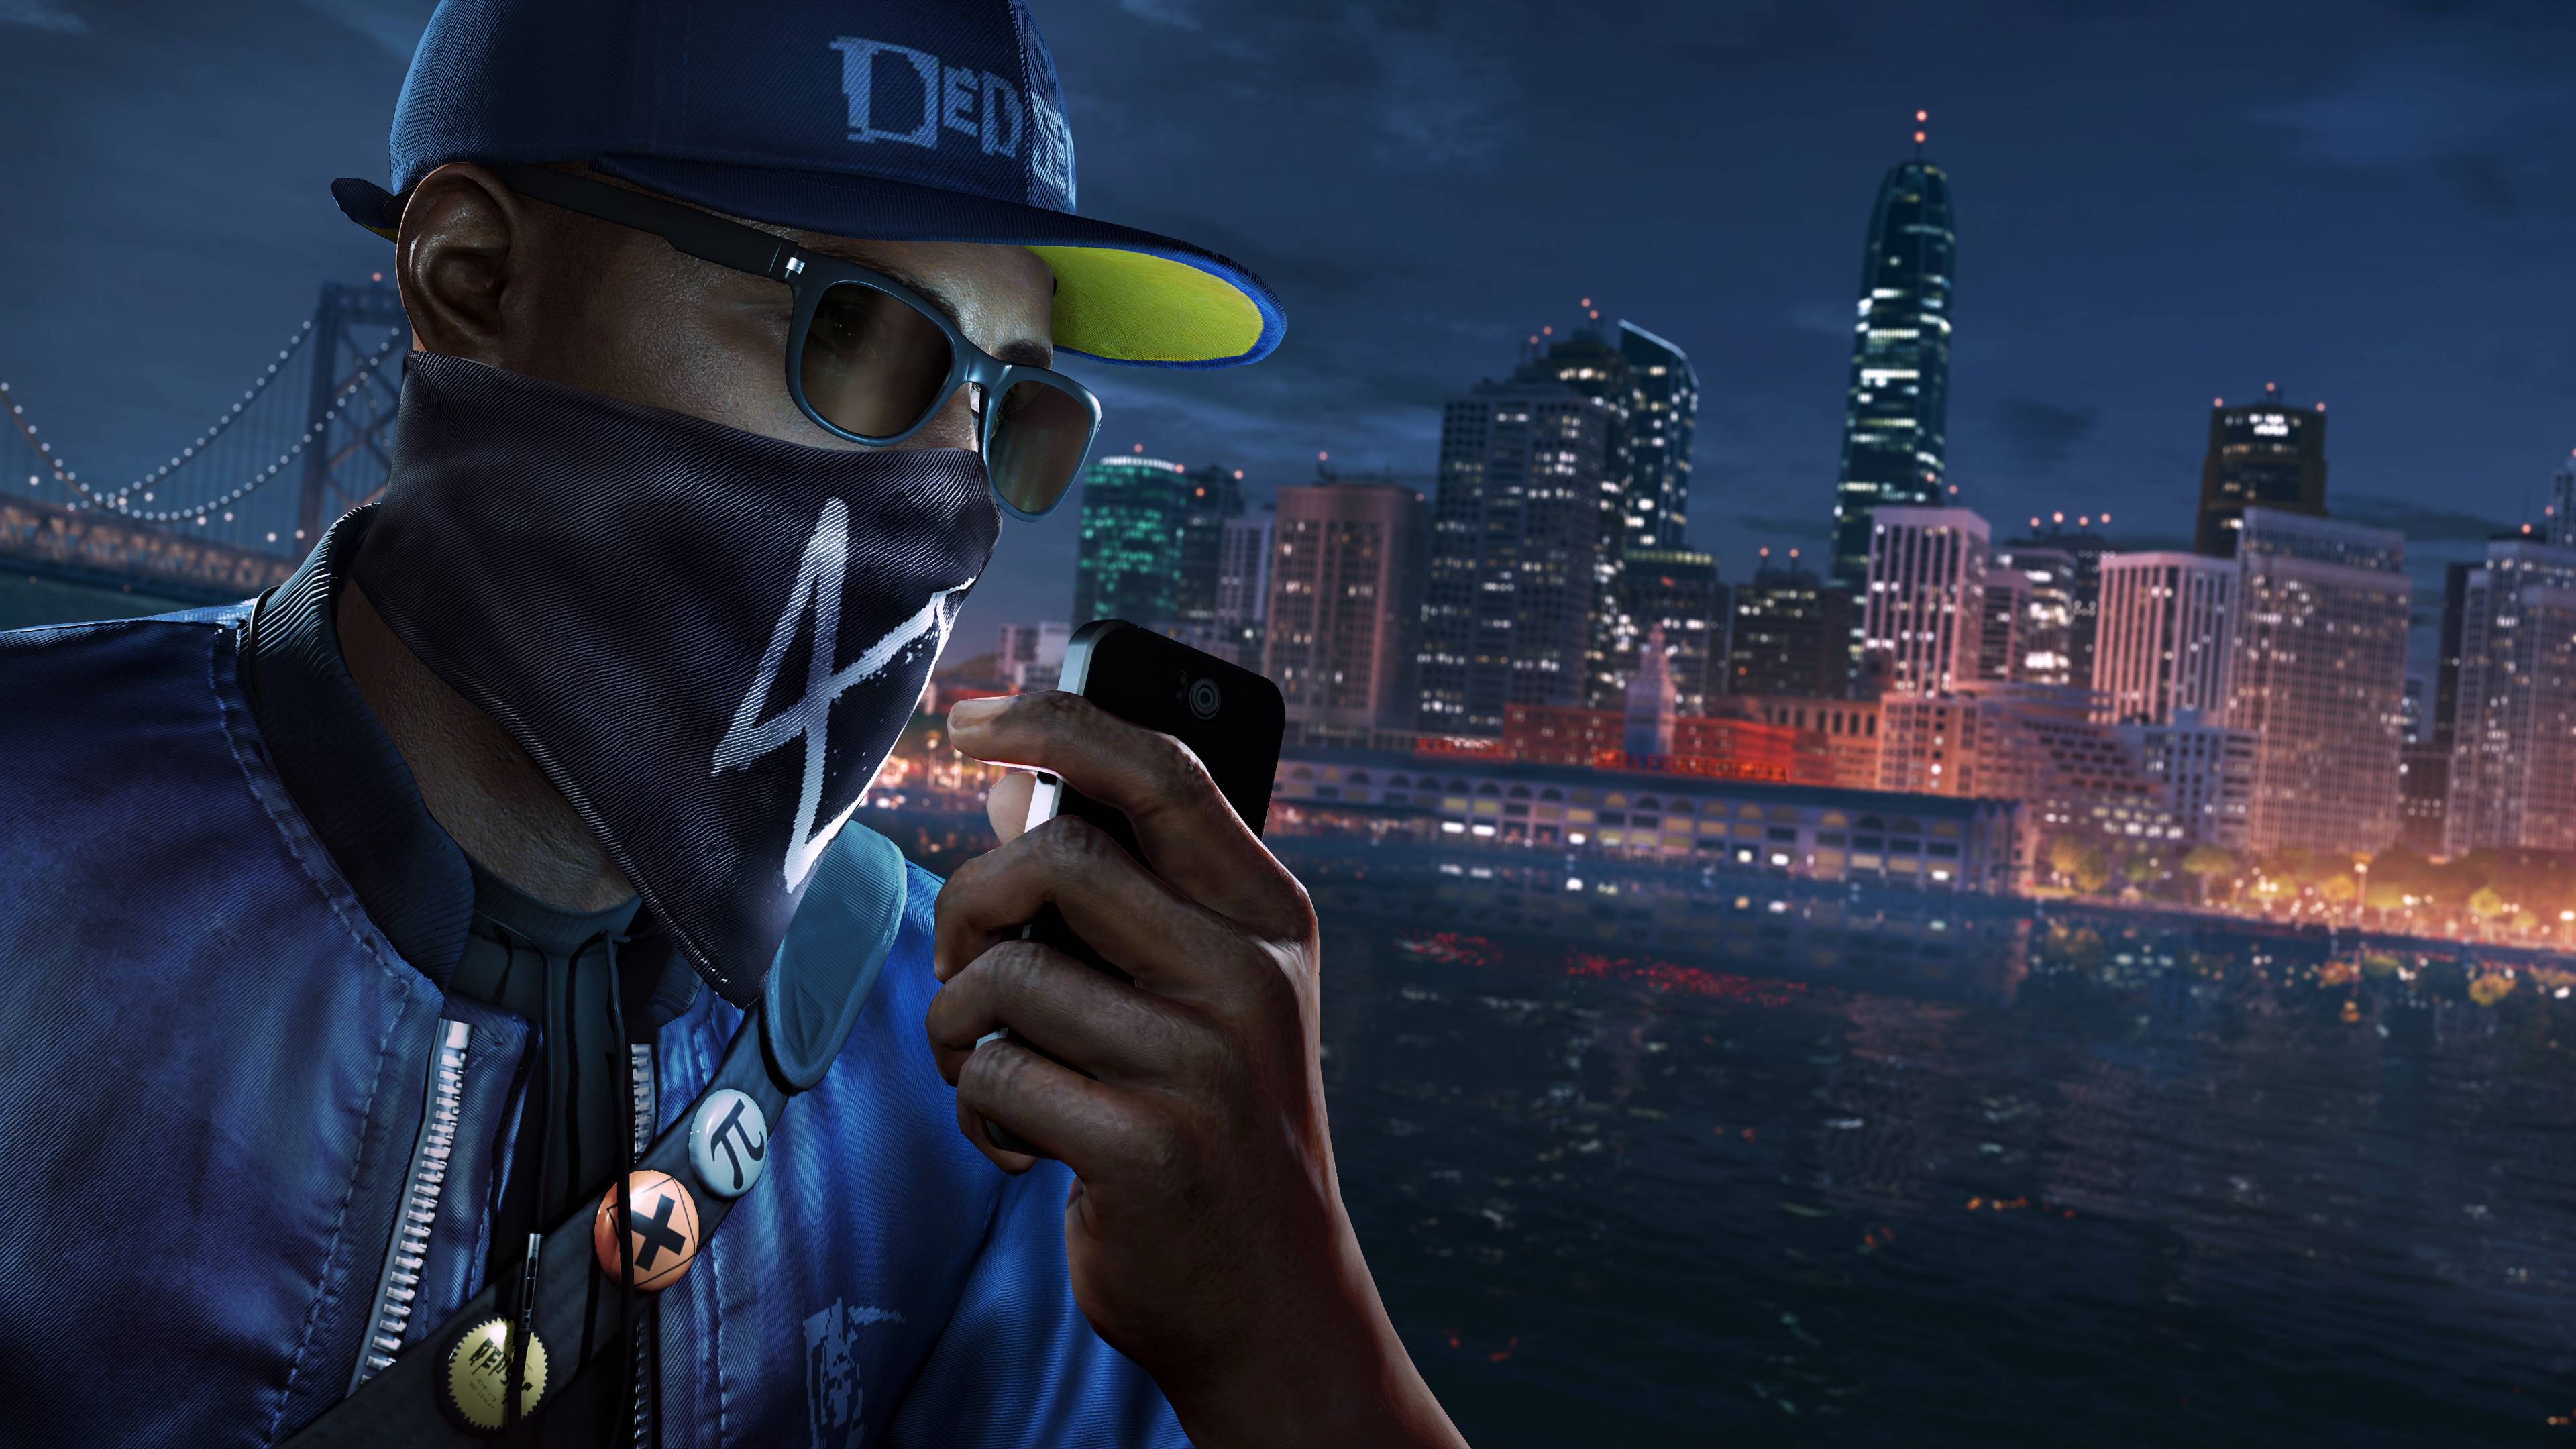 Watch Dogs 2 Wallpapers - Wallpaper Cave